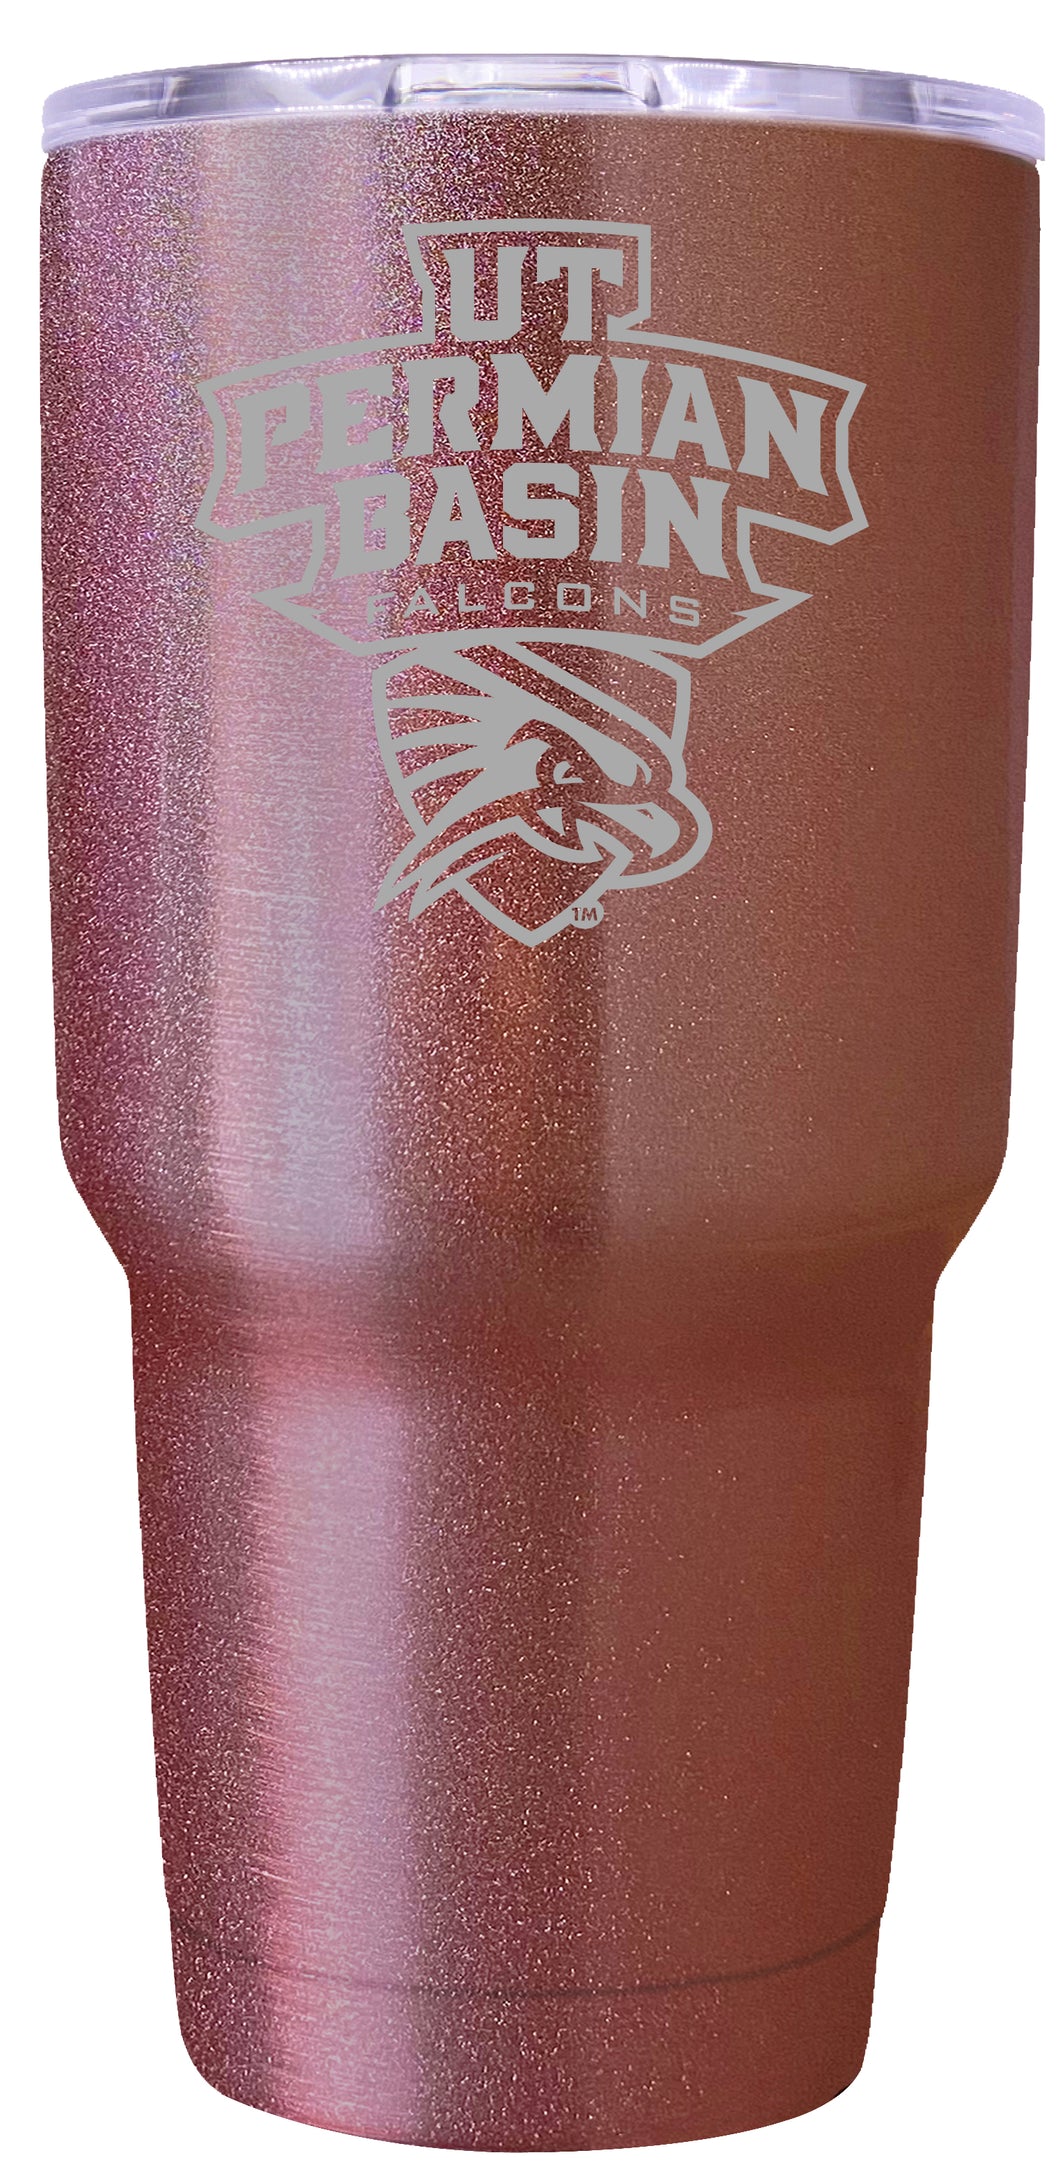 University of Texas of the Permian Basin Premium Laser Engraved Tumbler - 24oz Stainless Steel Insulated Mug Rose Gold